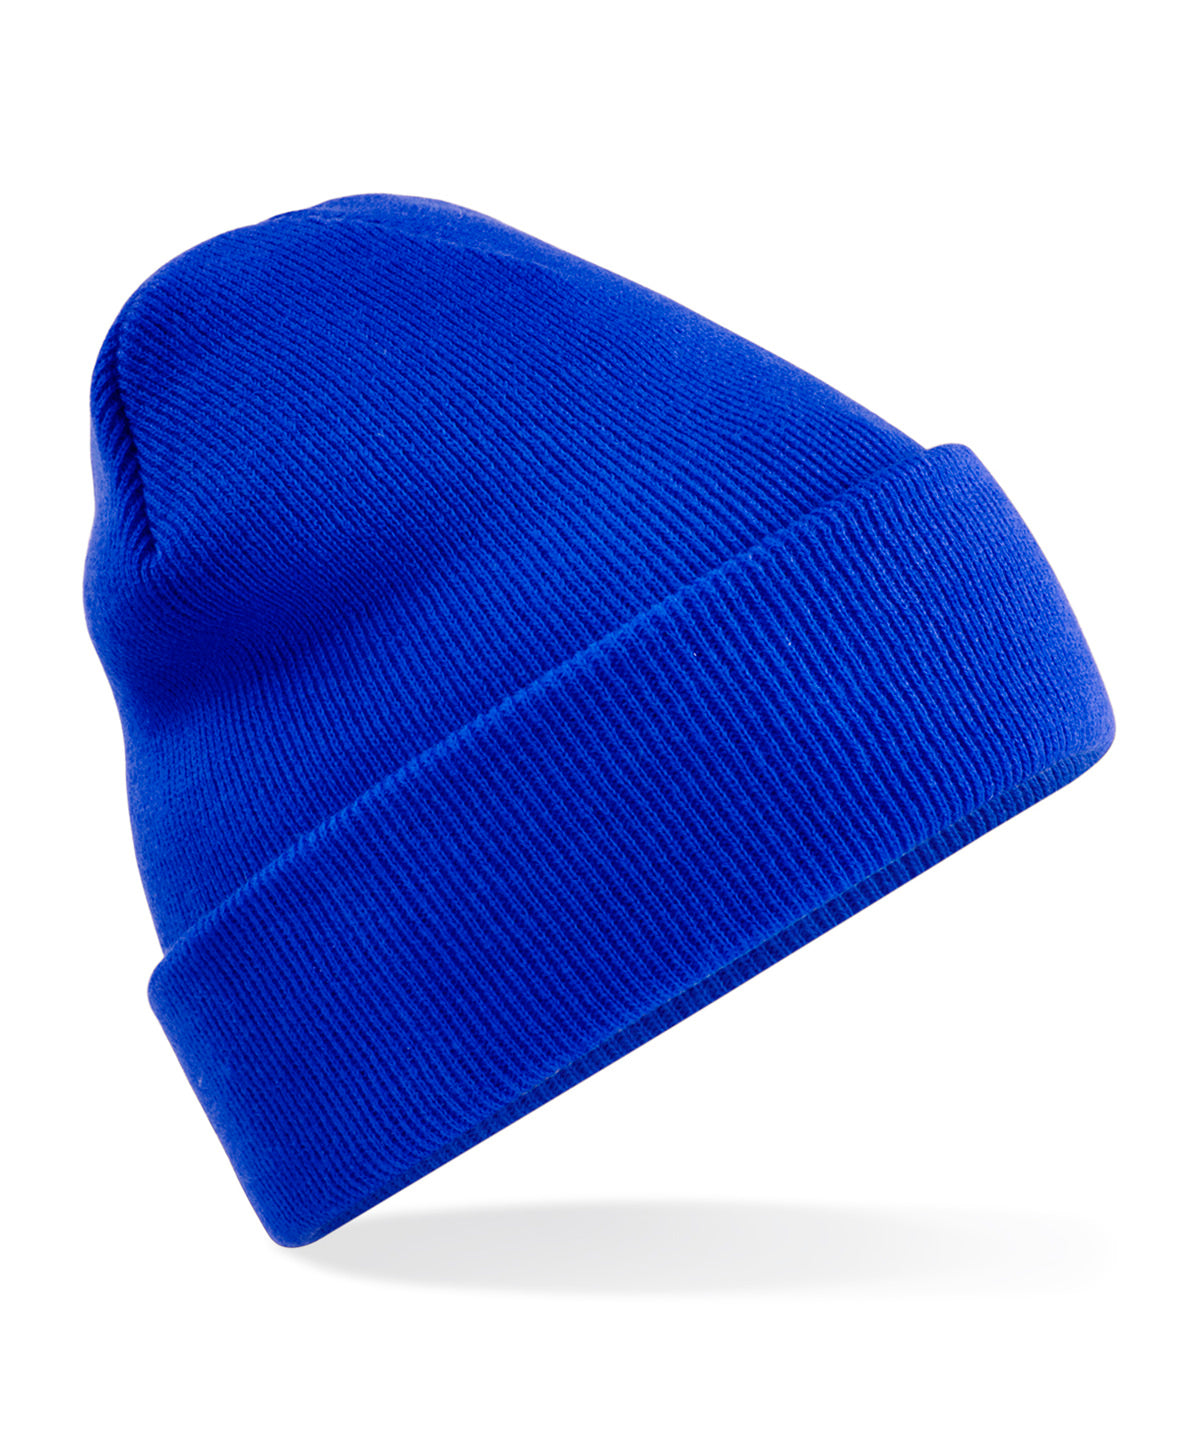 Personalised Hats - Royal Beechfield Recycled original cuffed beanie